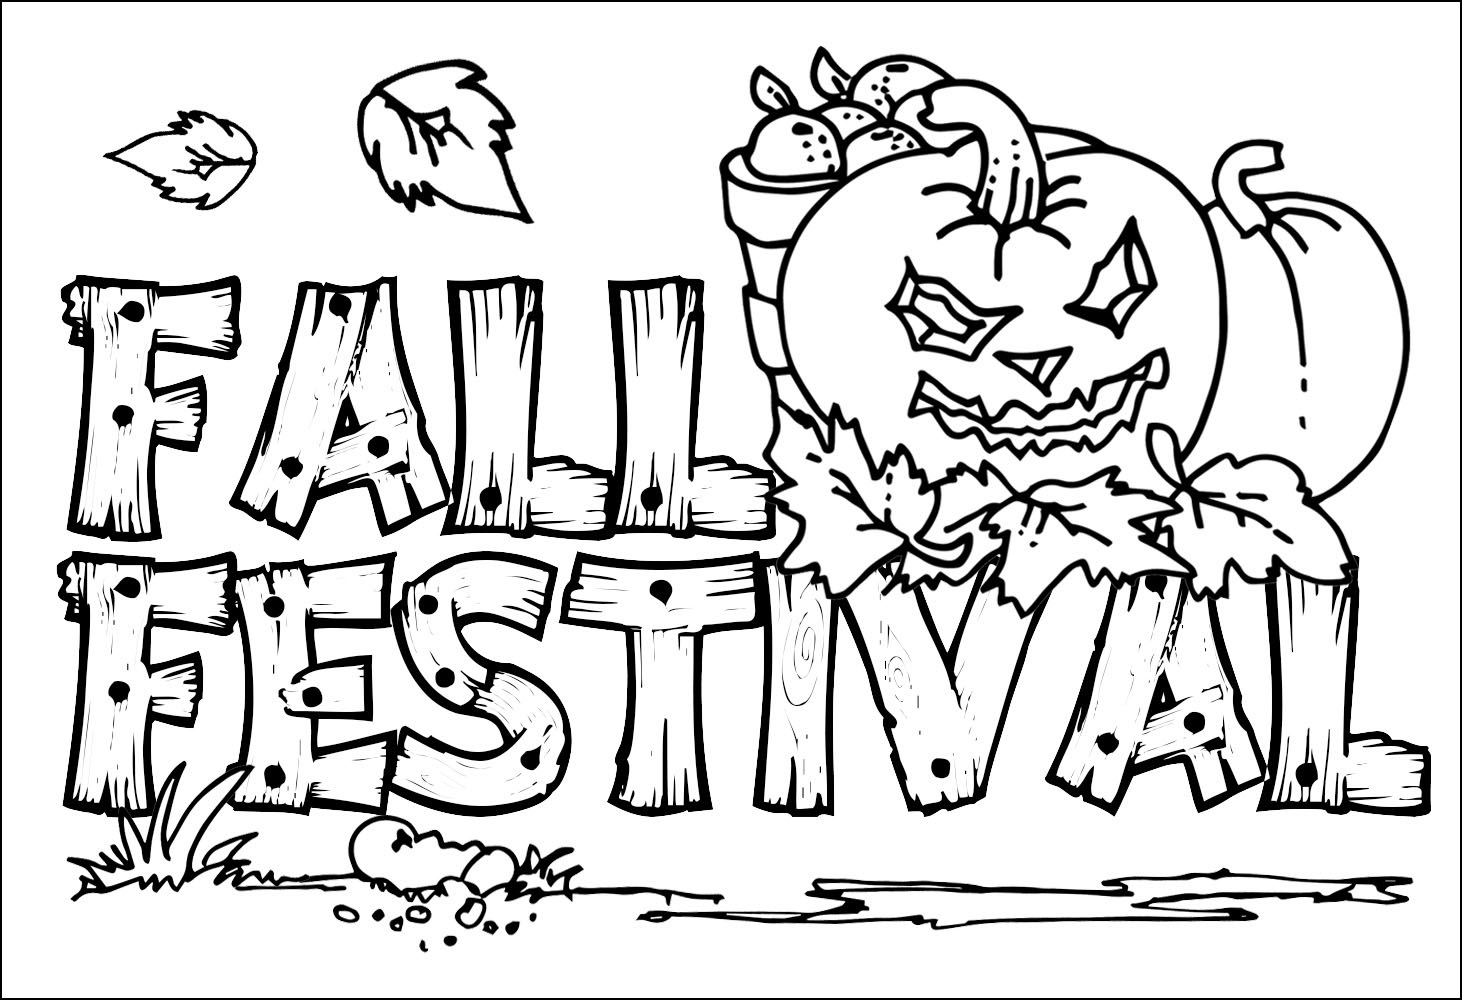 Fall Harvest Coloring Pages at GetDrawings.com | Free for personal use